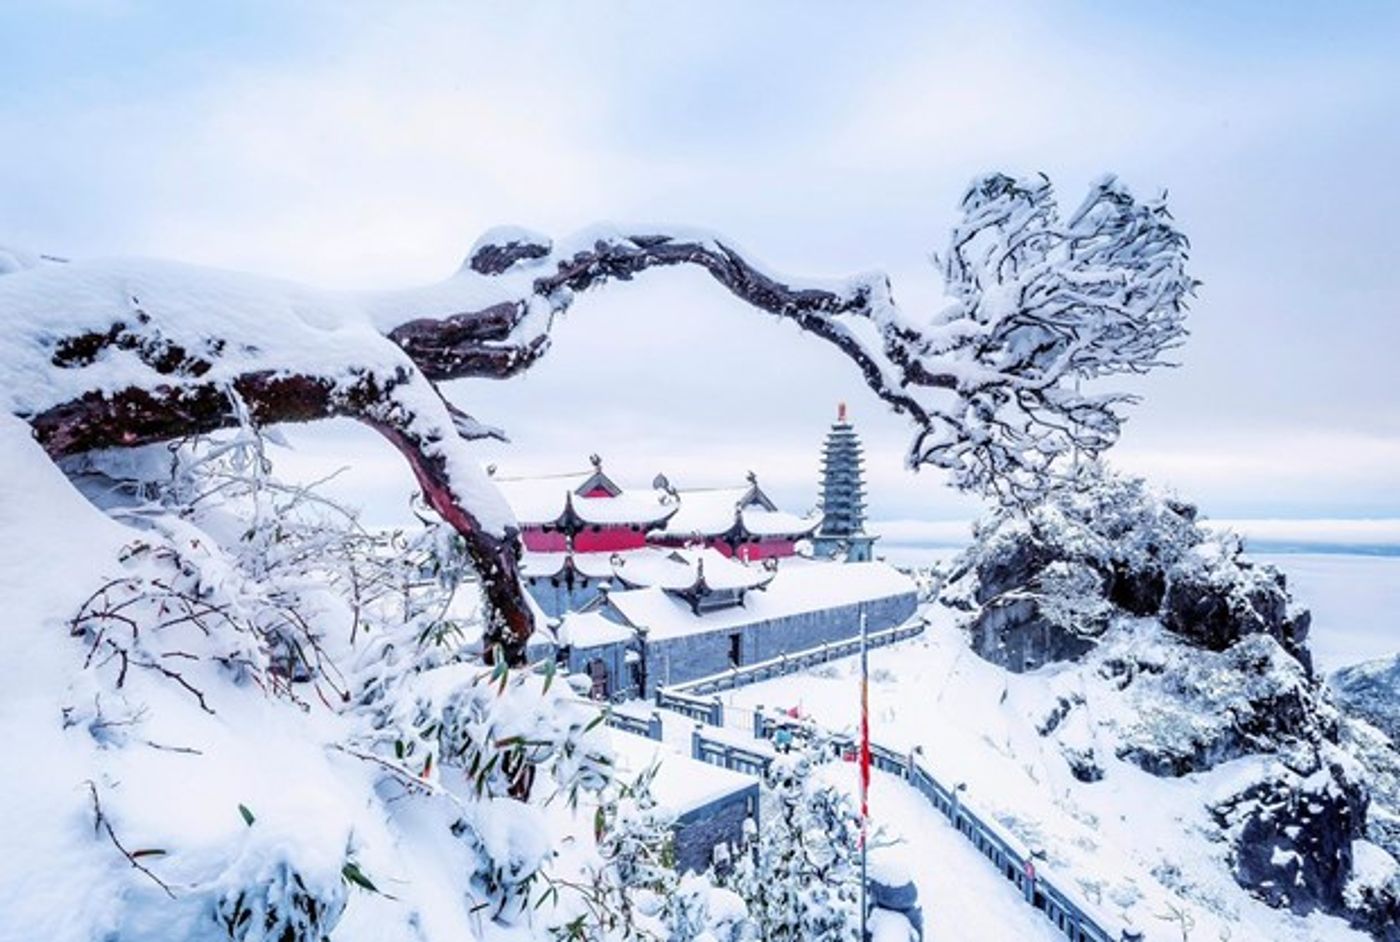 Snow as beautiful as in a fairy tale on Fansipan. (Photo: Nguyen Manh Cuong)